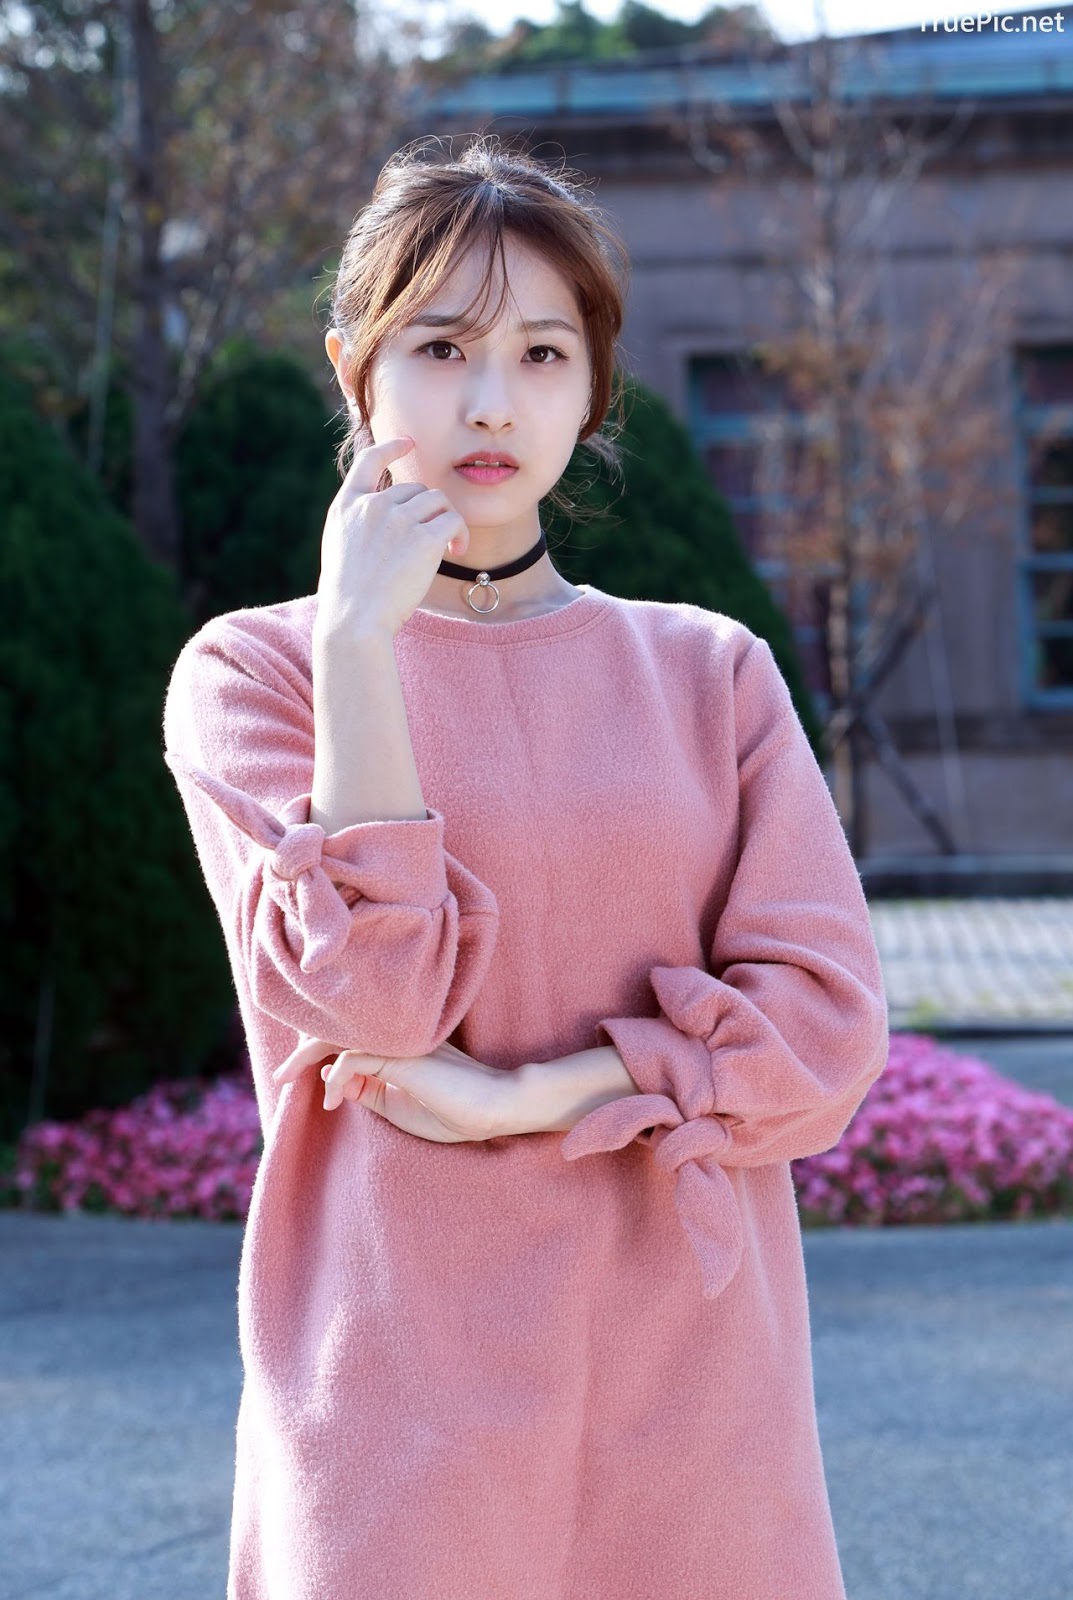 Image-Taiwanese-Model-郭思敏-Pure-And-Gorgeous-Girl-In-Pink-Sweater-Dress-TruePic.net- Picture-23